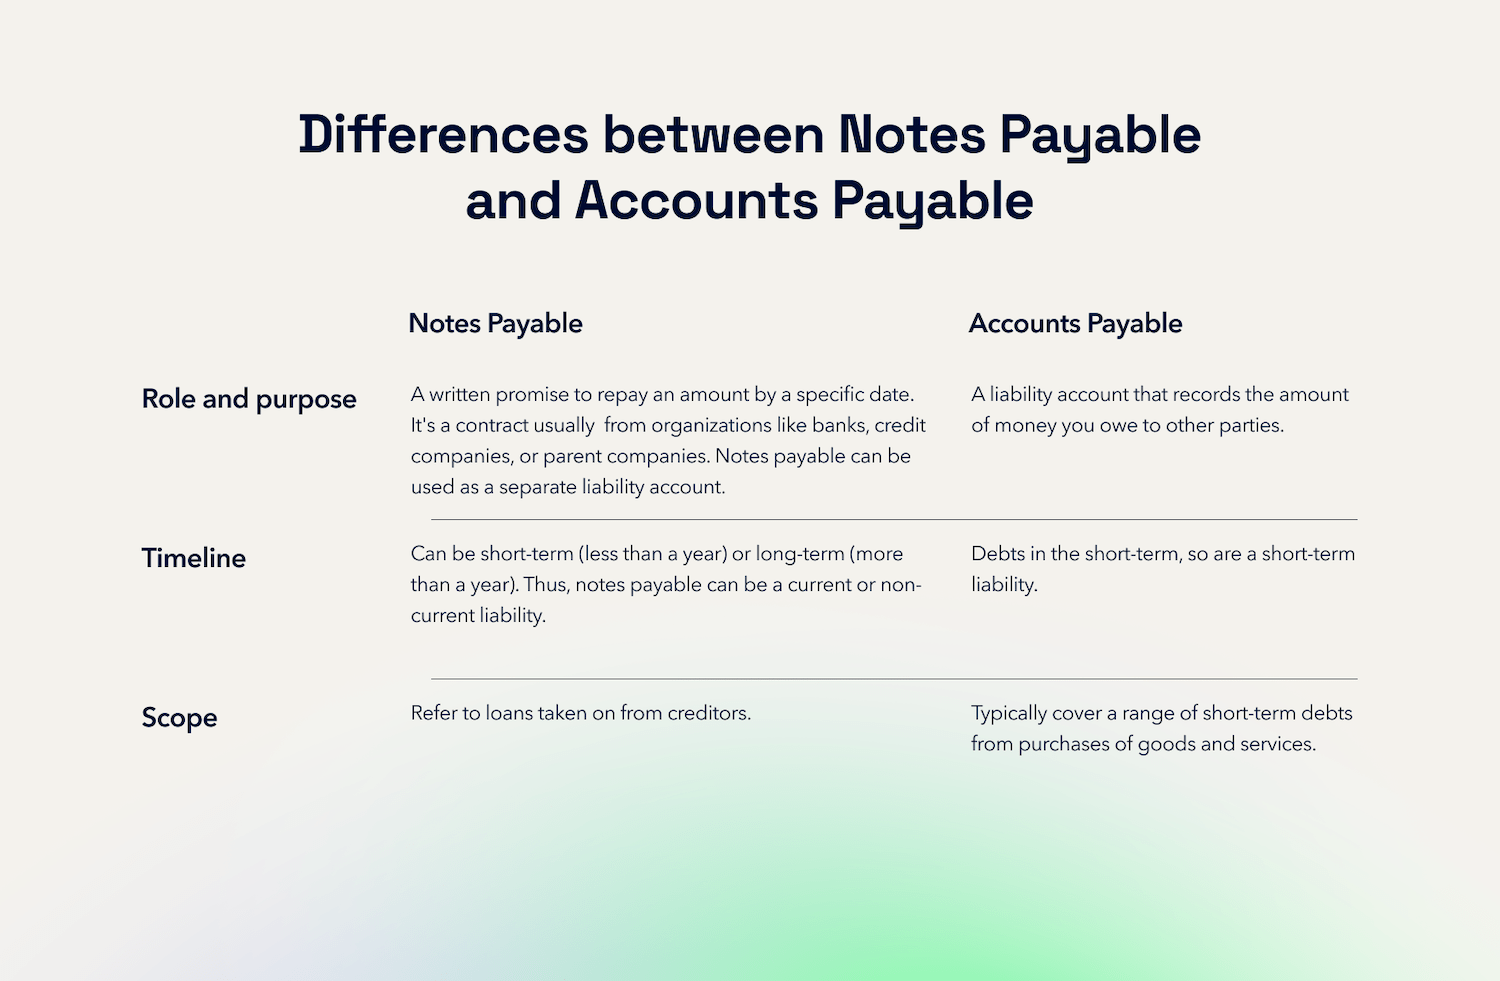 Differences between notes payable and accounts payable